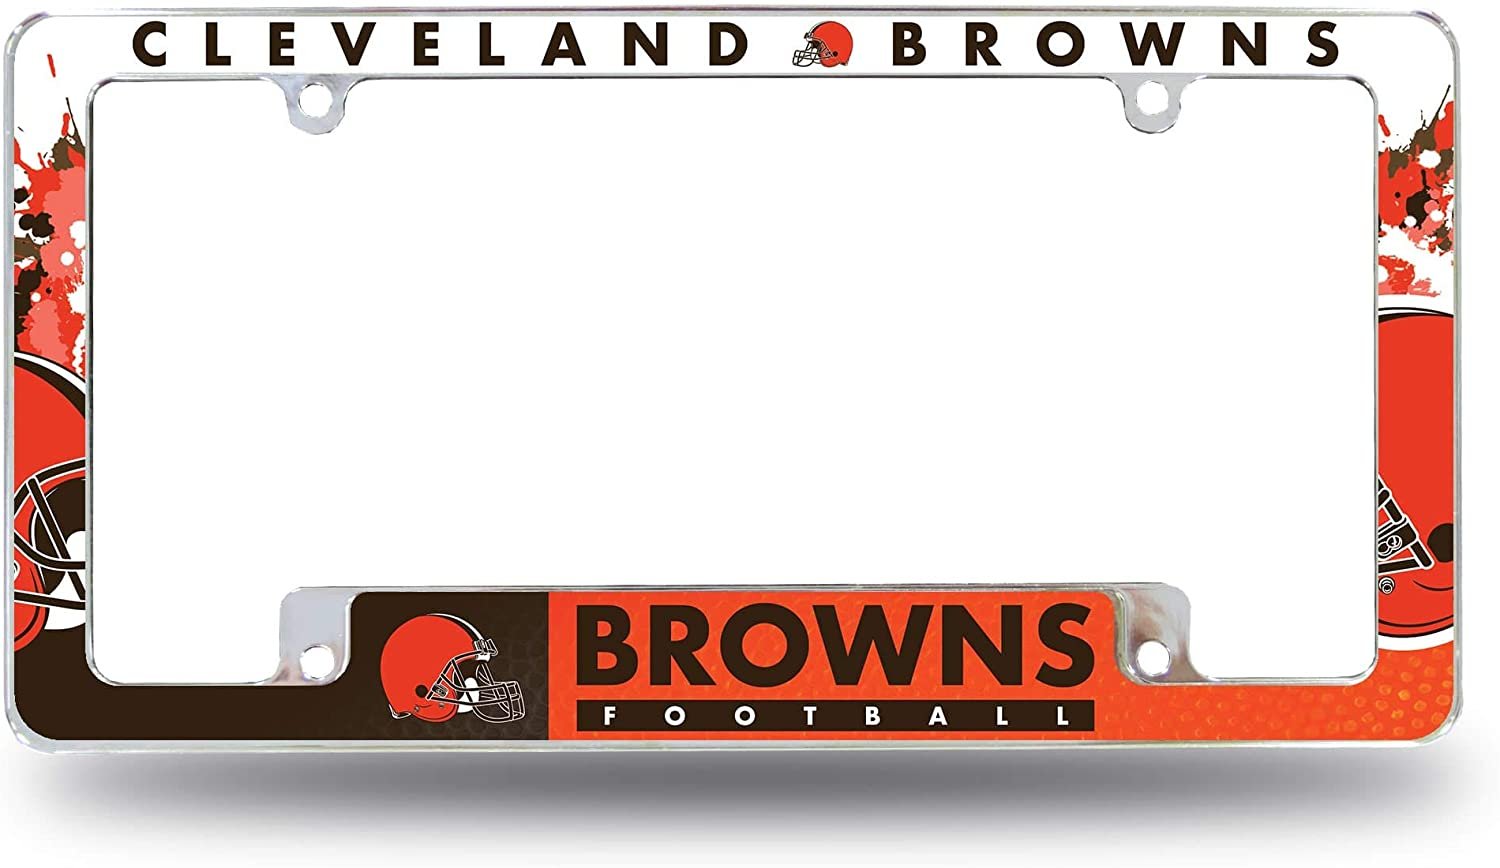 Cleveland Browns Metal License Plate Frame Chrome Tag Cover All Over Design 6x12 Inch